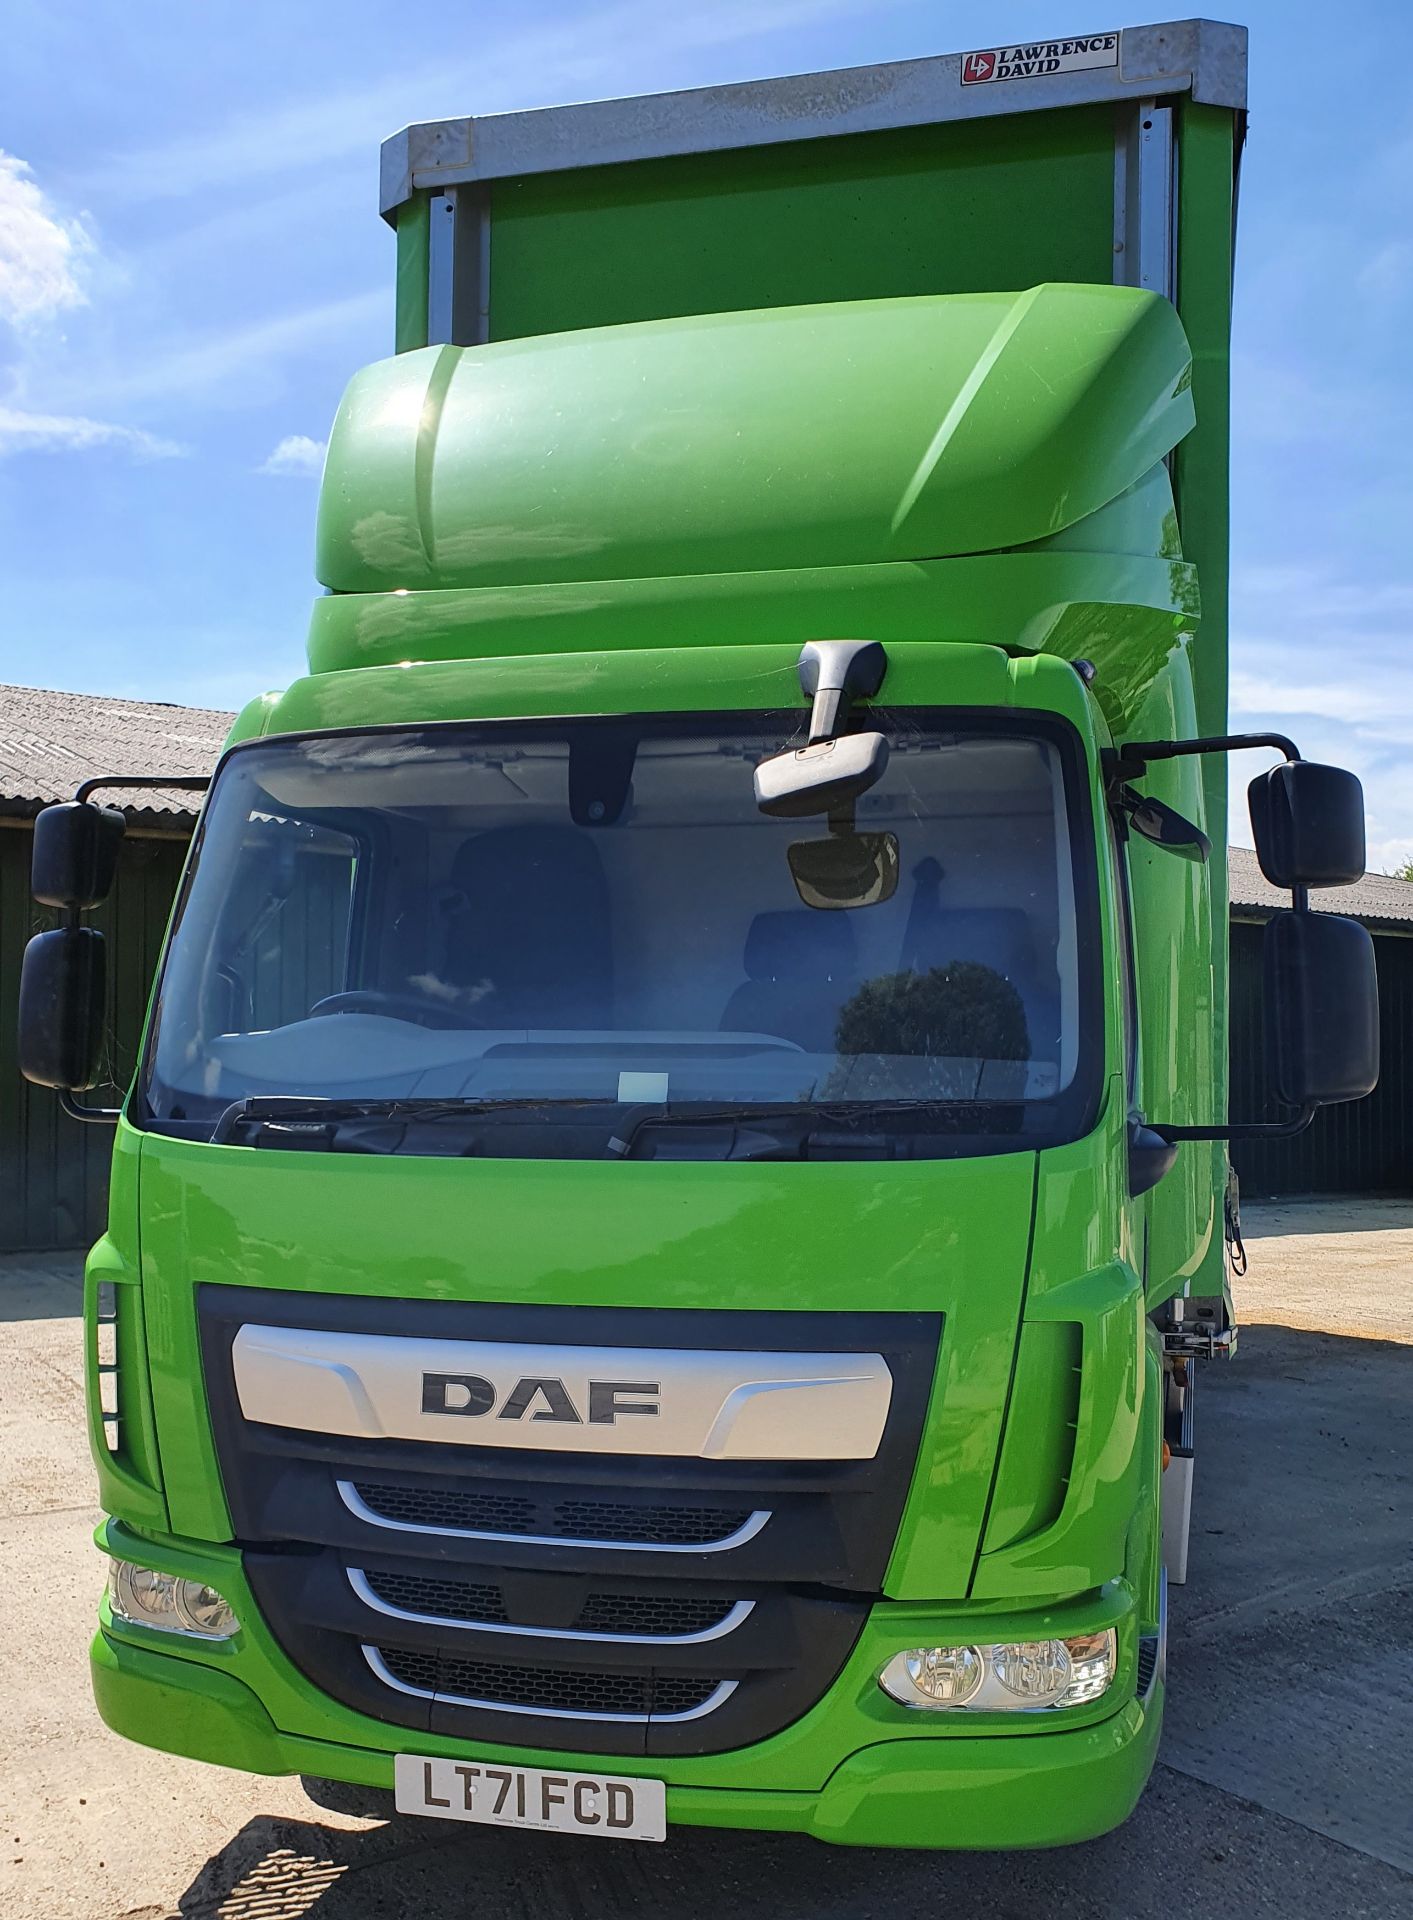 A DAF LF210 12000Kg capacity Curtain Sided Truck, Registration No. LT71 FCD, with LAWRENCE DAVID